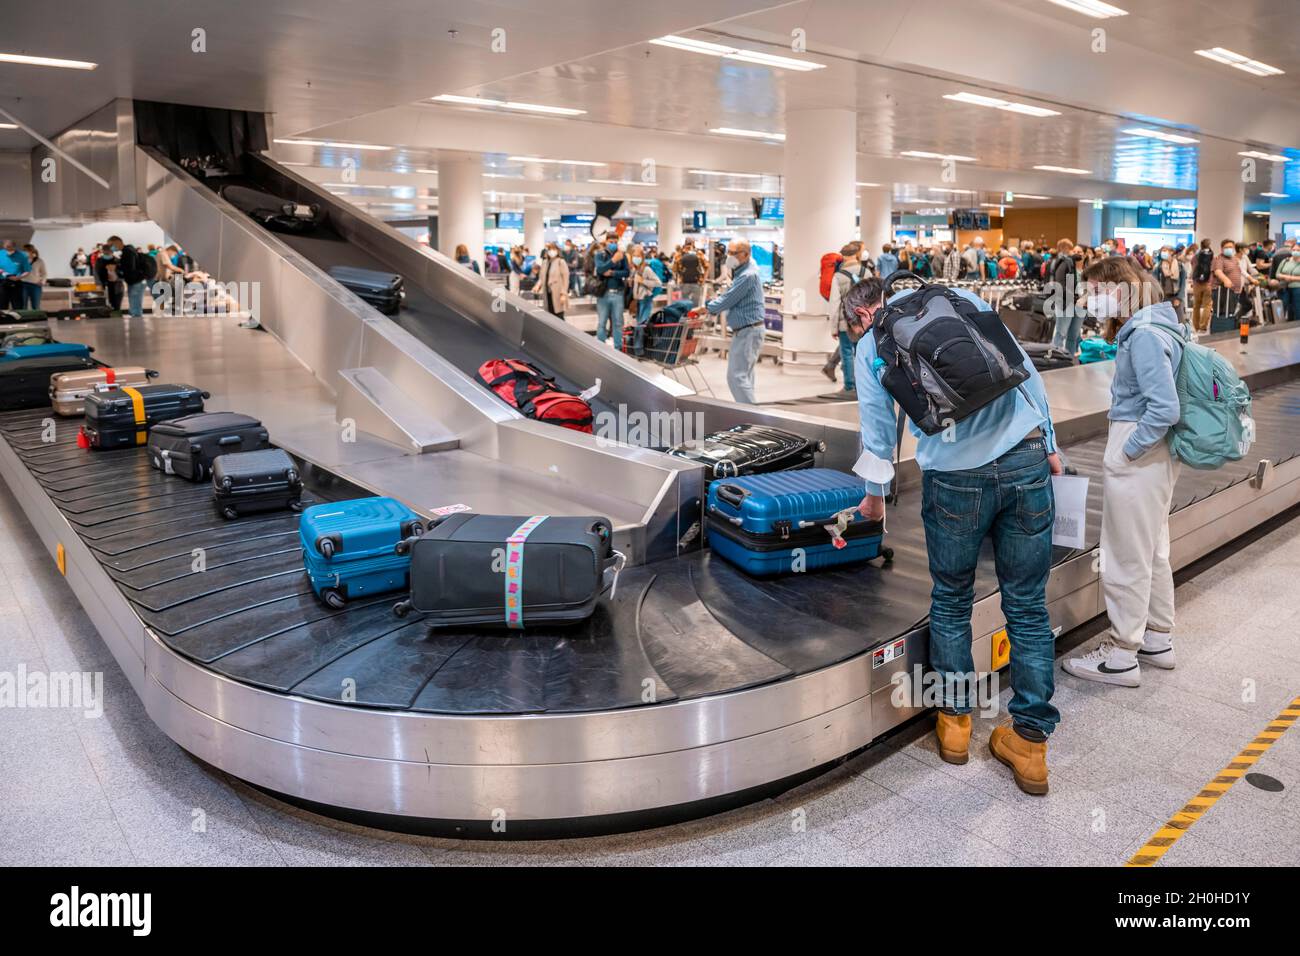 People waiting at baggage claim at an airport, Reykjavik Airport, Iceland Stock Photo